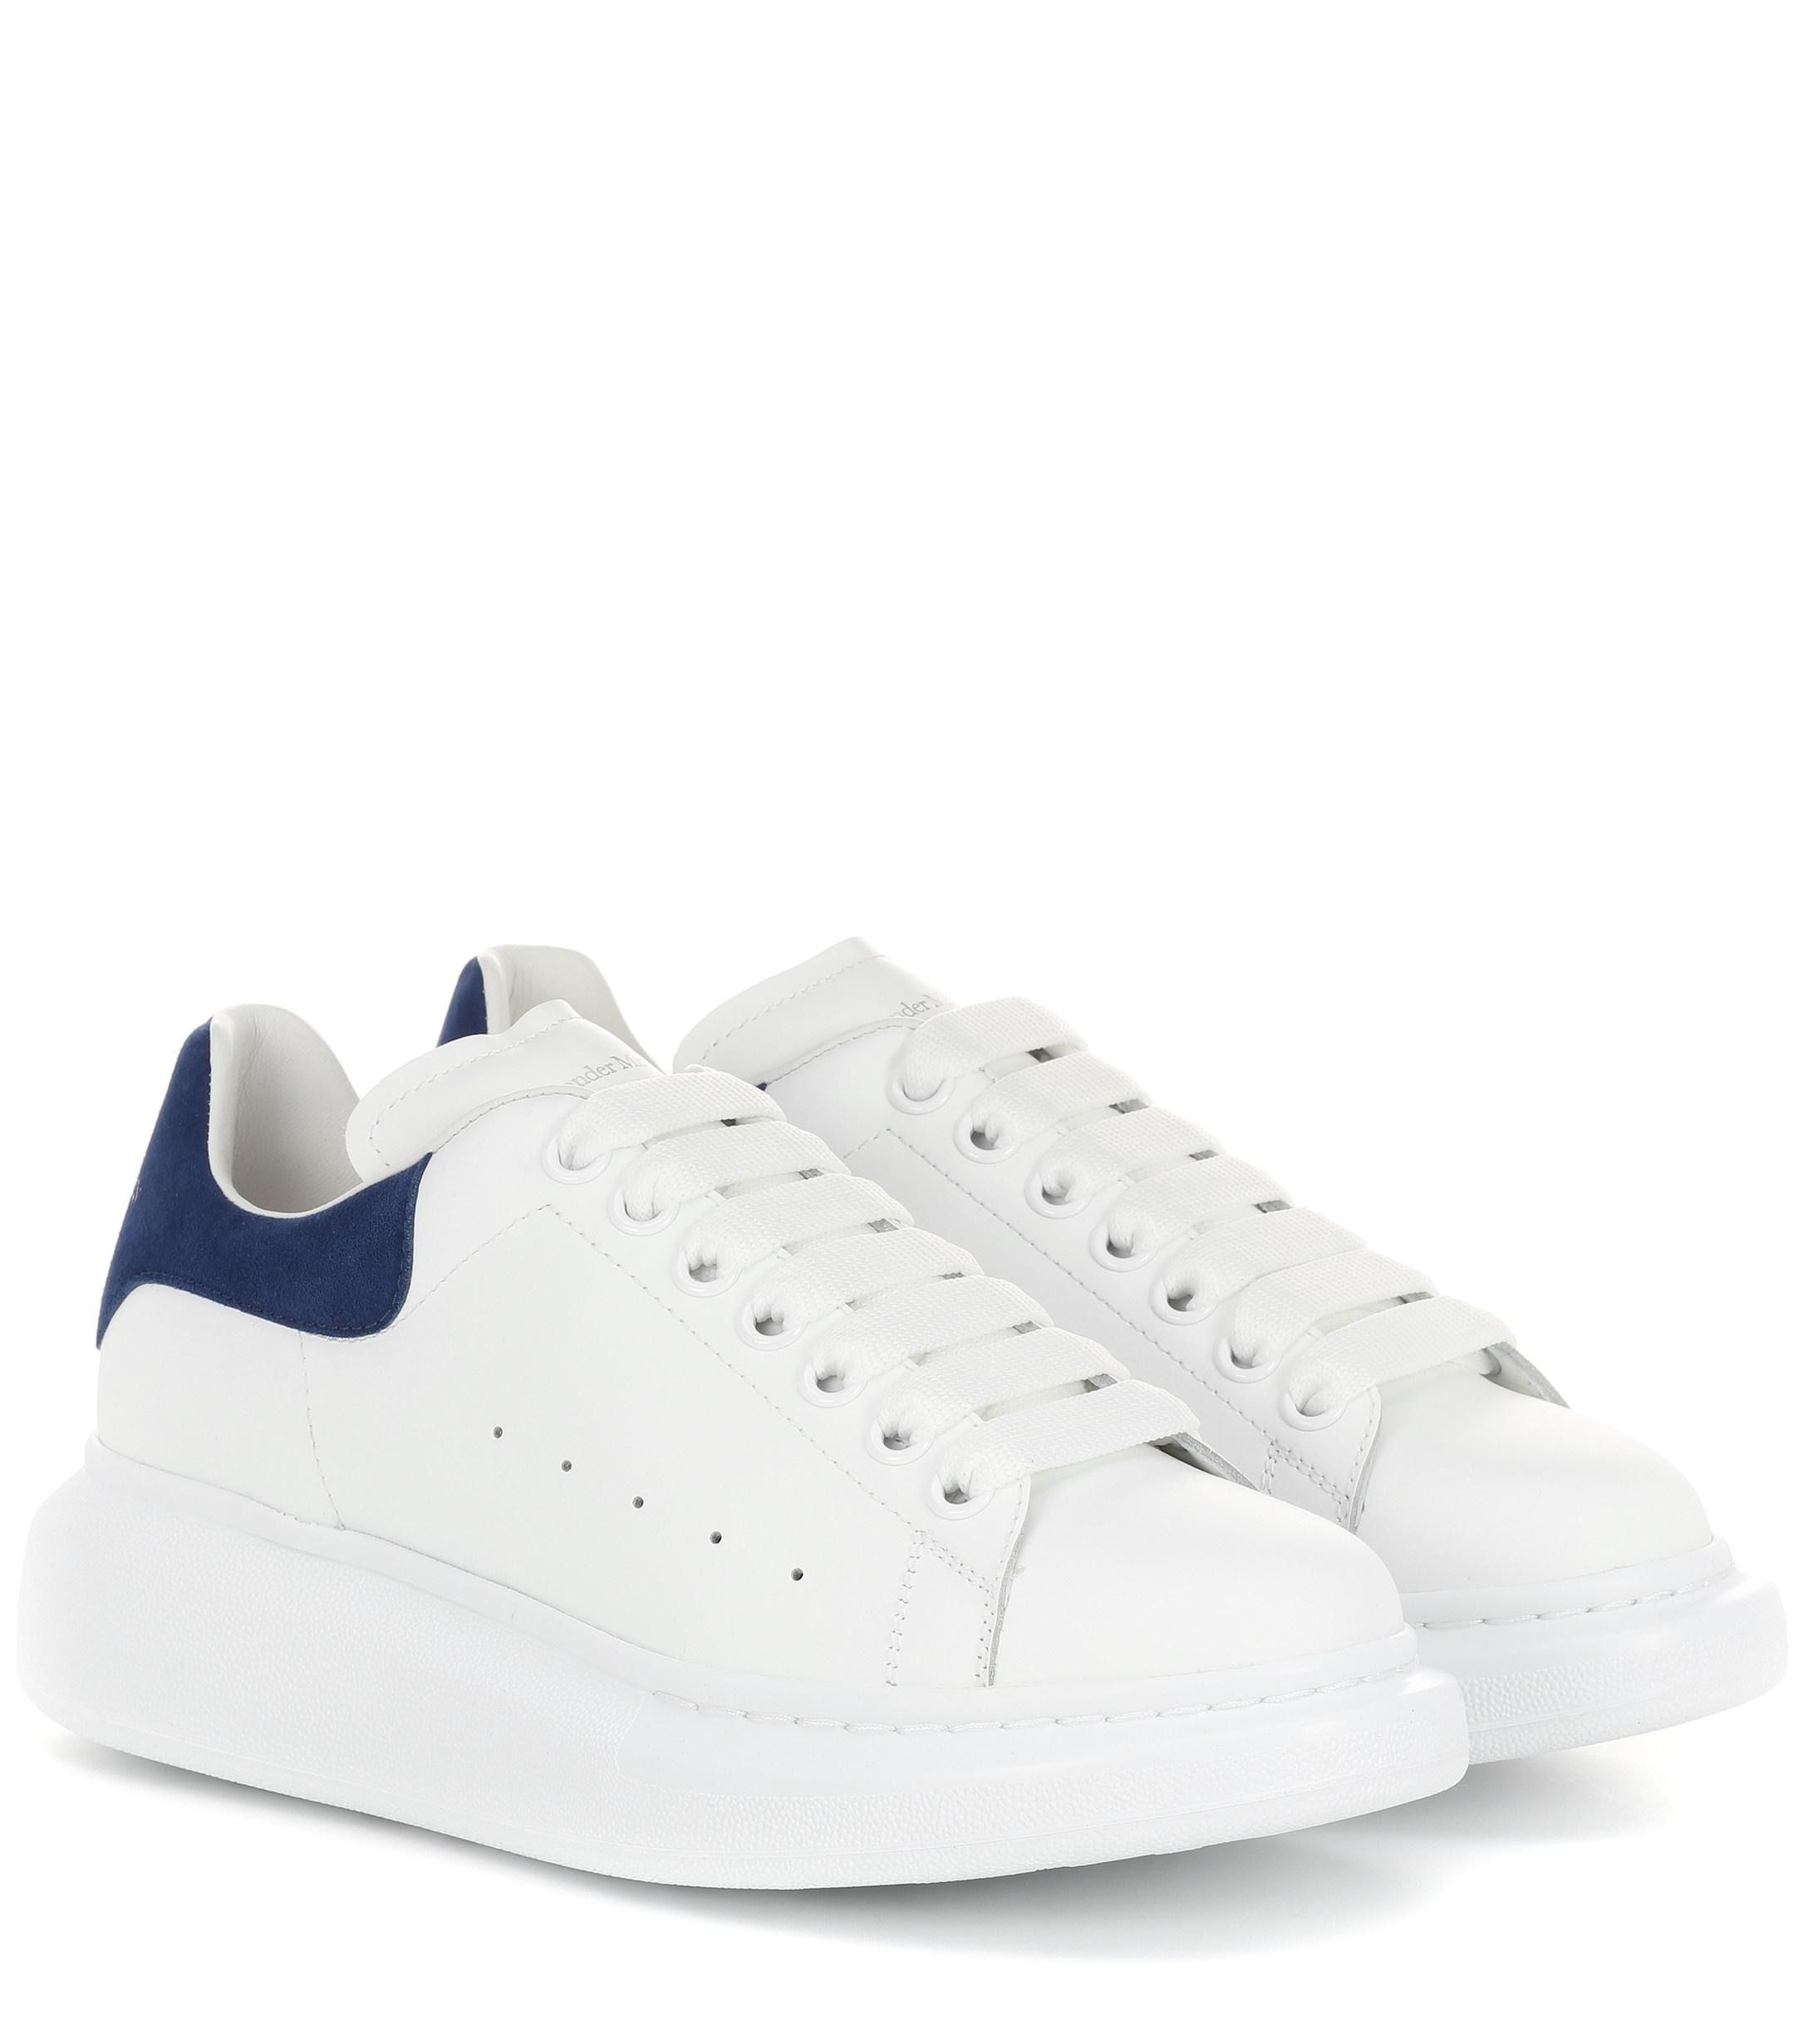 Alexander McQueen Leather Sneakers in White - Lyst